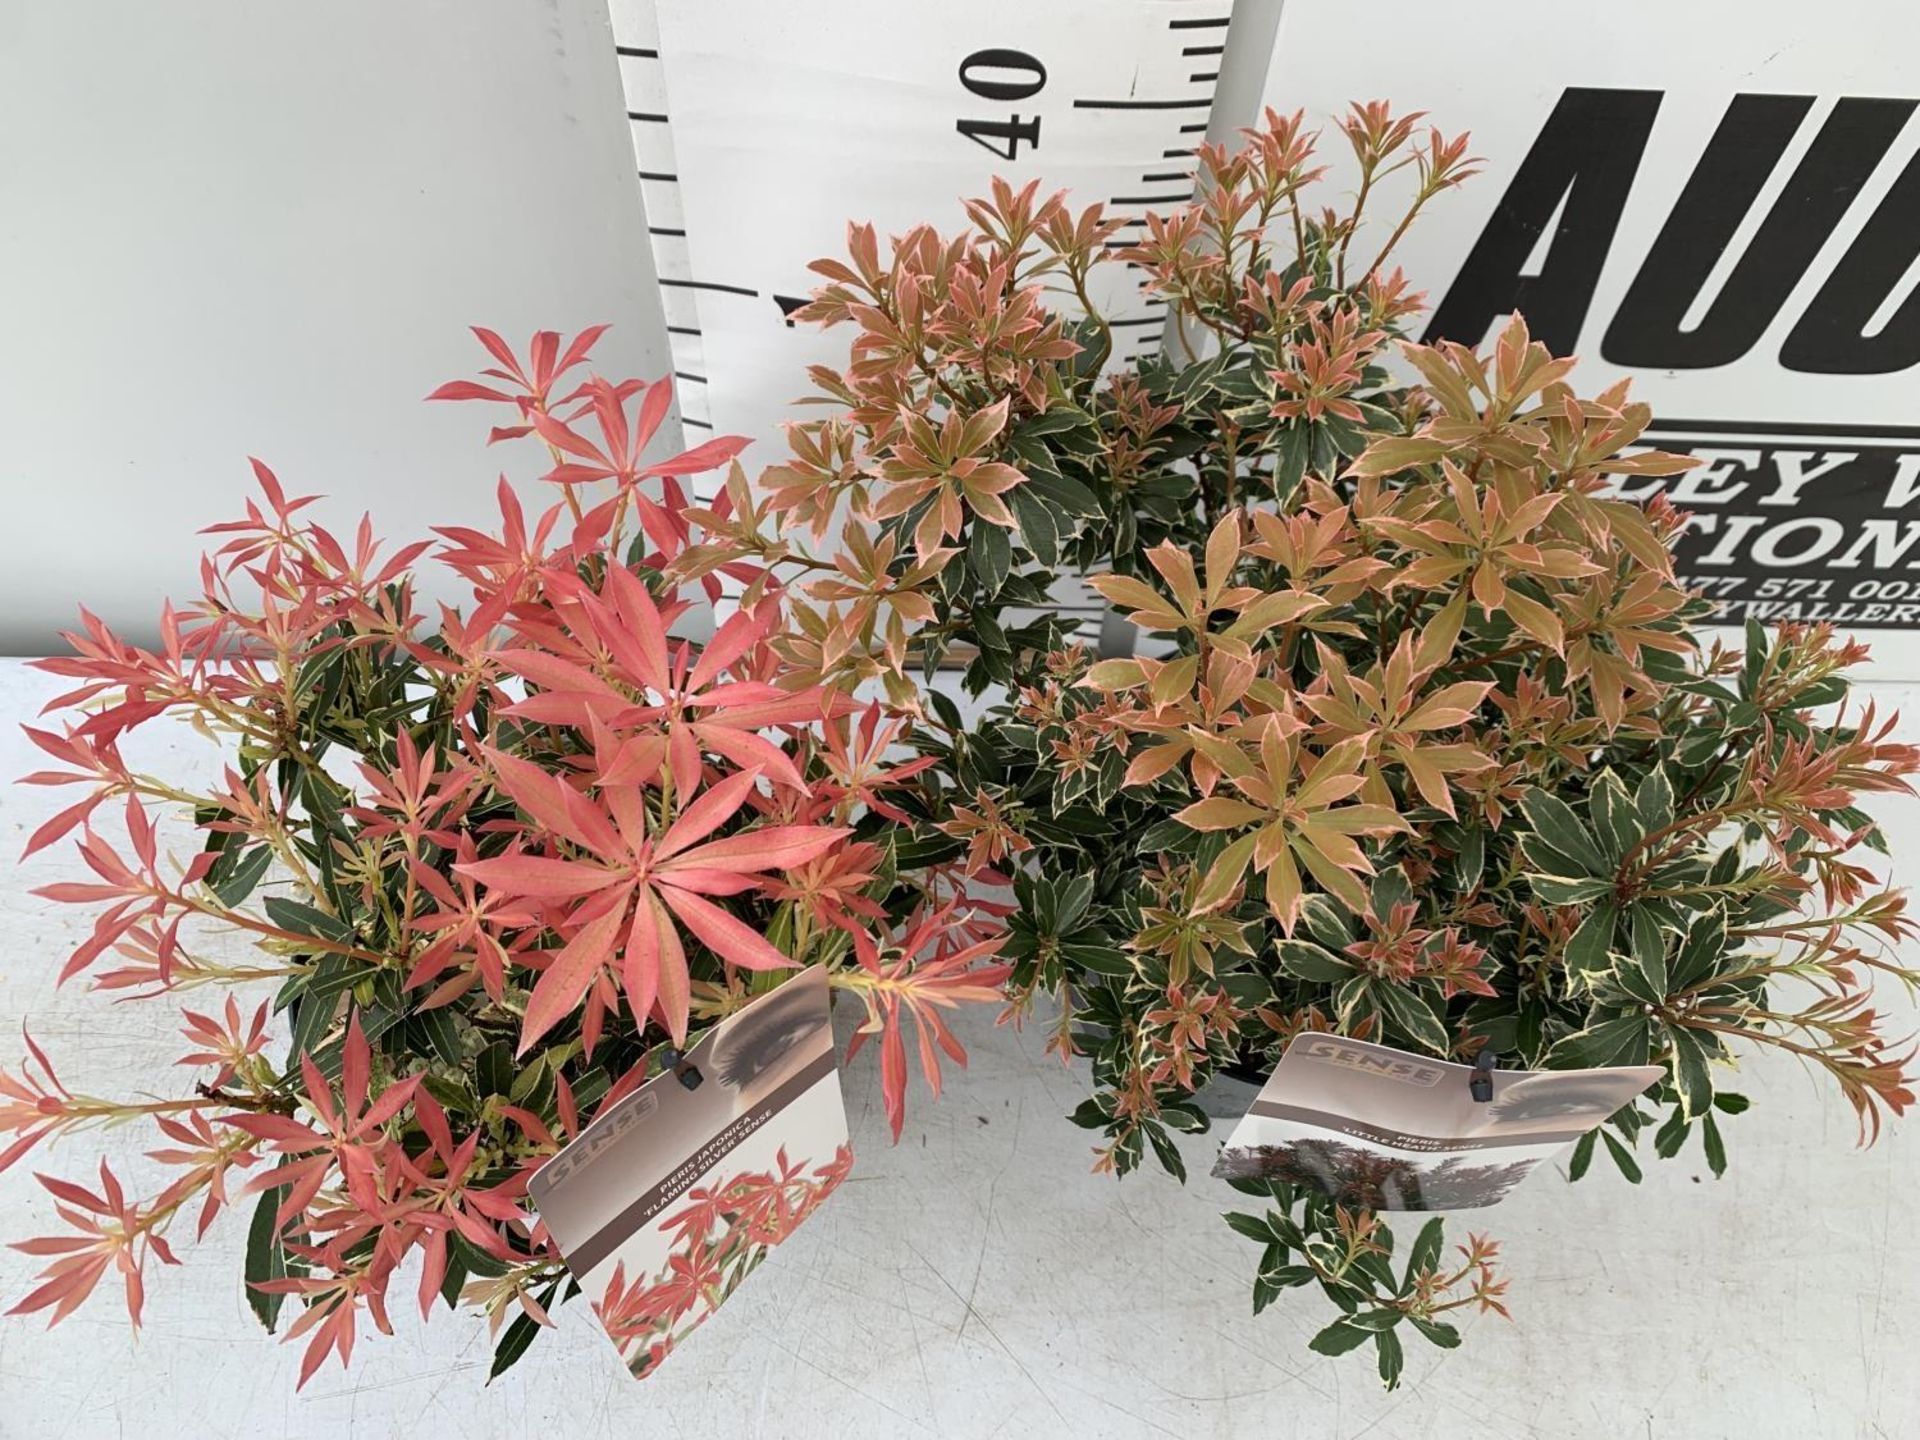 TWO PIERIS JAPONICA LITTLE HEATH AND FLAMING SILVER IN 3 LTR POTS 45CM TALL PLUS VAT TO BE SOLD - Image 8 of 10